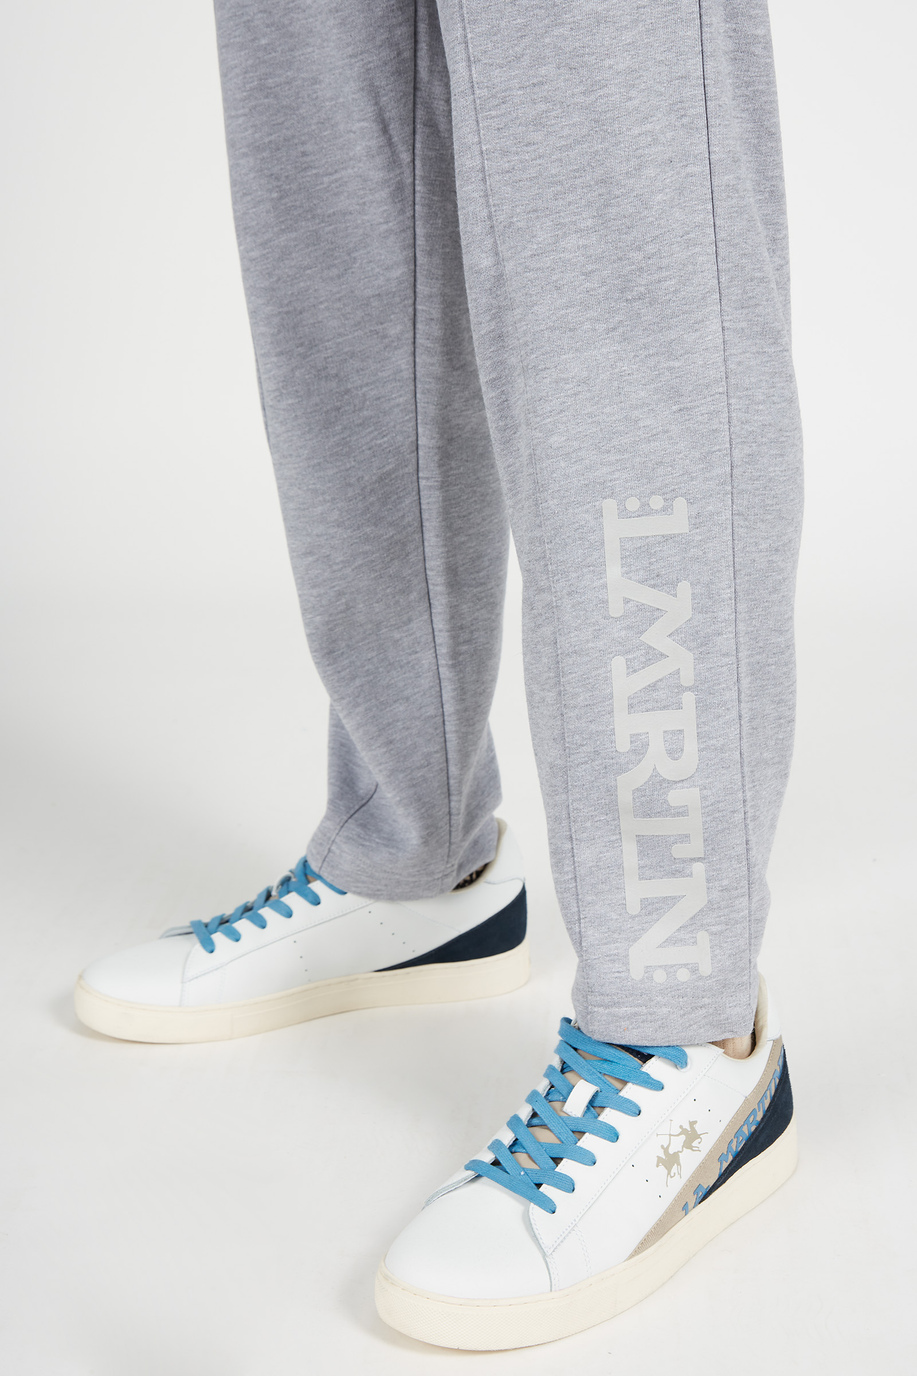 Men’s cotton jogger trousers with drawstring